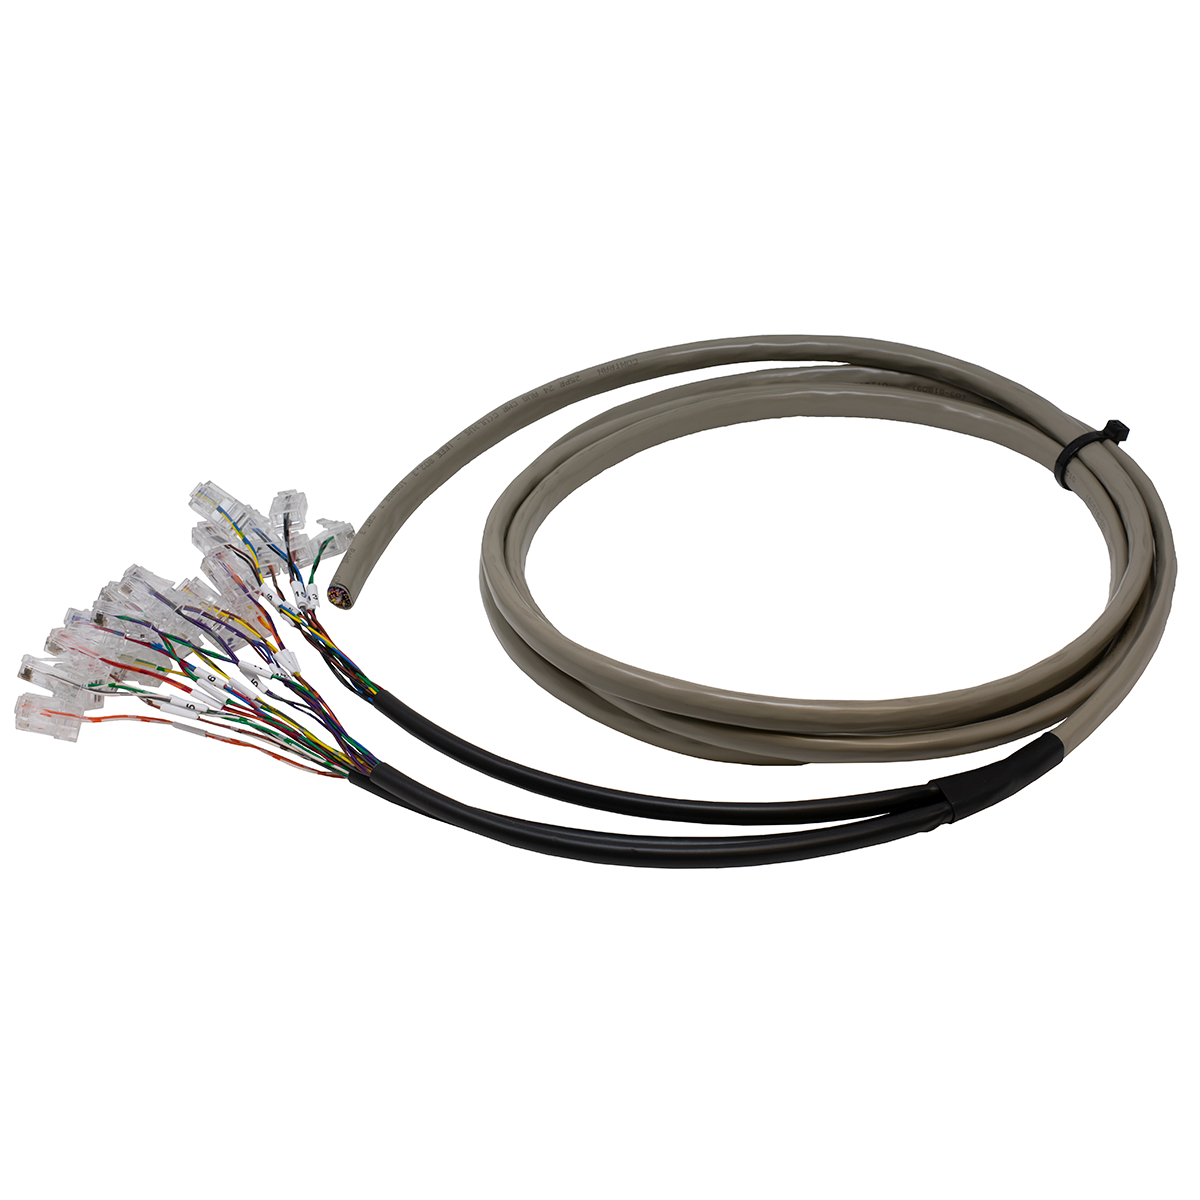 QWIK 25' Avaya IP Office / Samsung Officeserv Cable